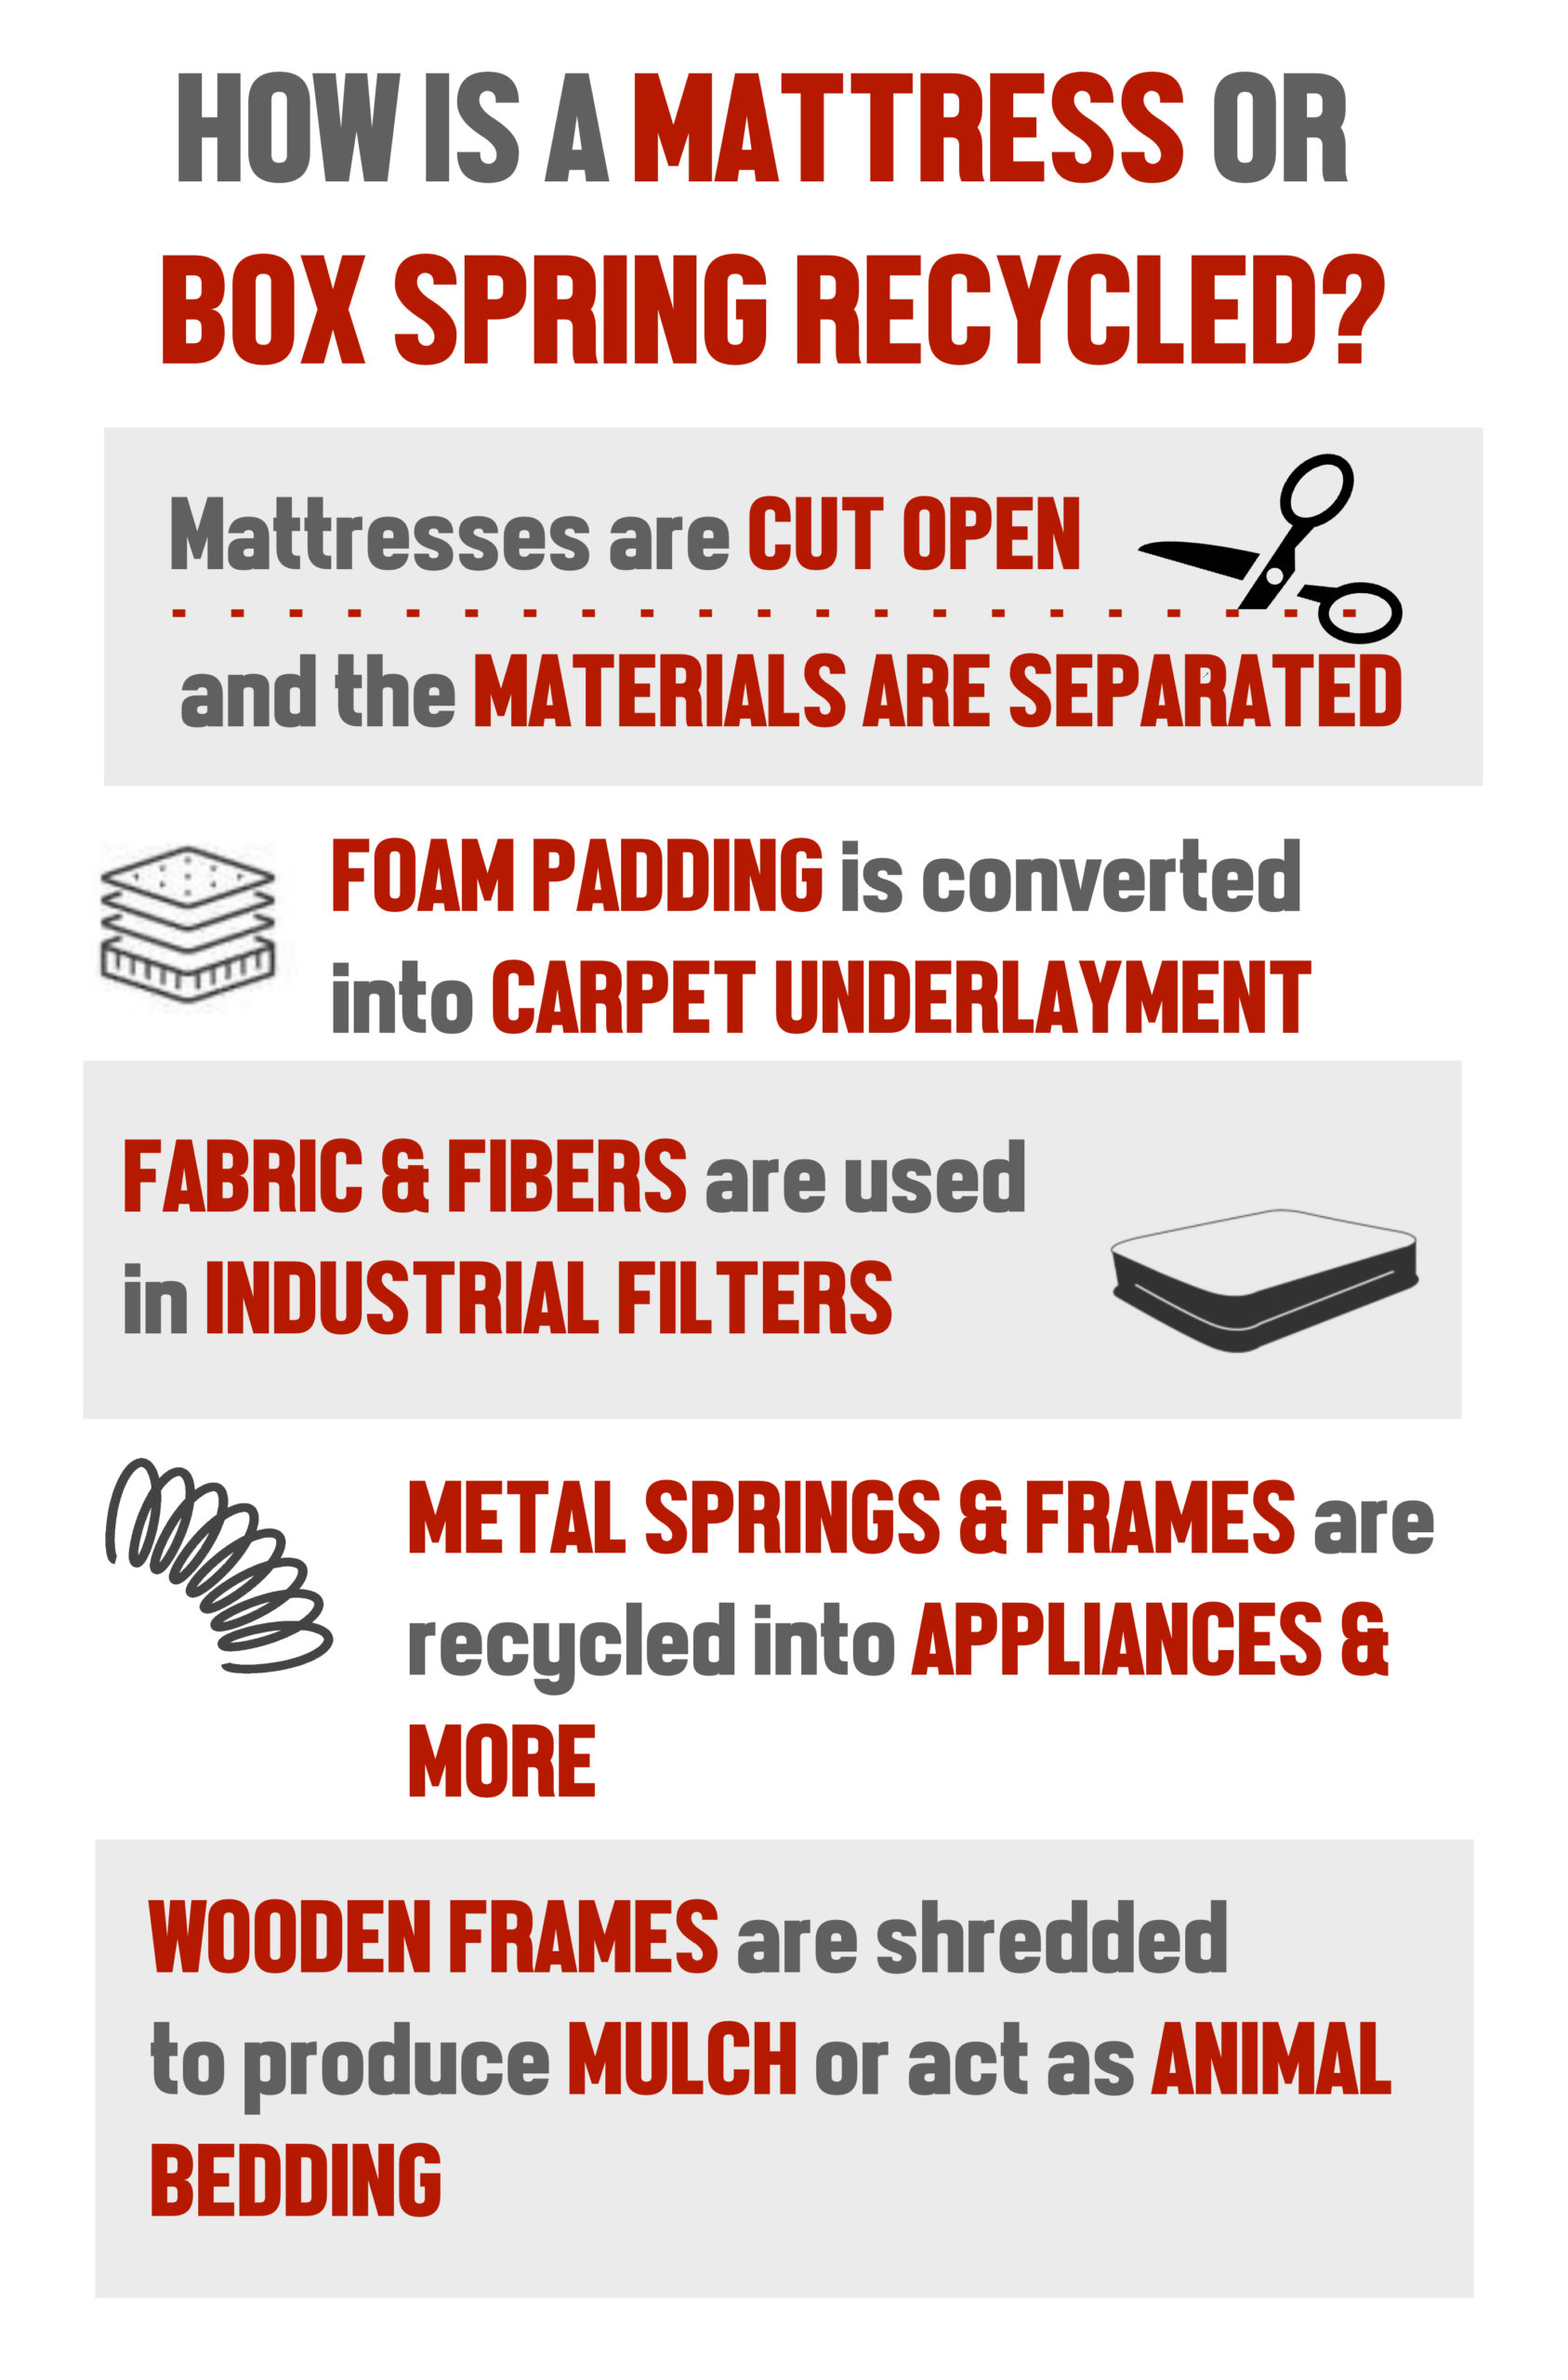 How Is A Mattress or Box Spring Recycled